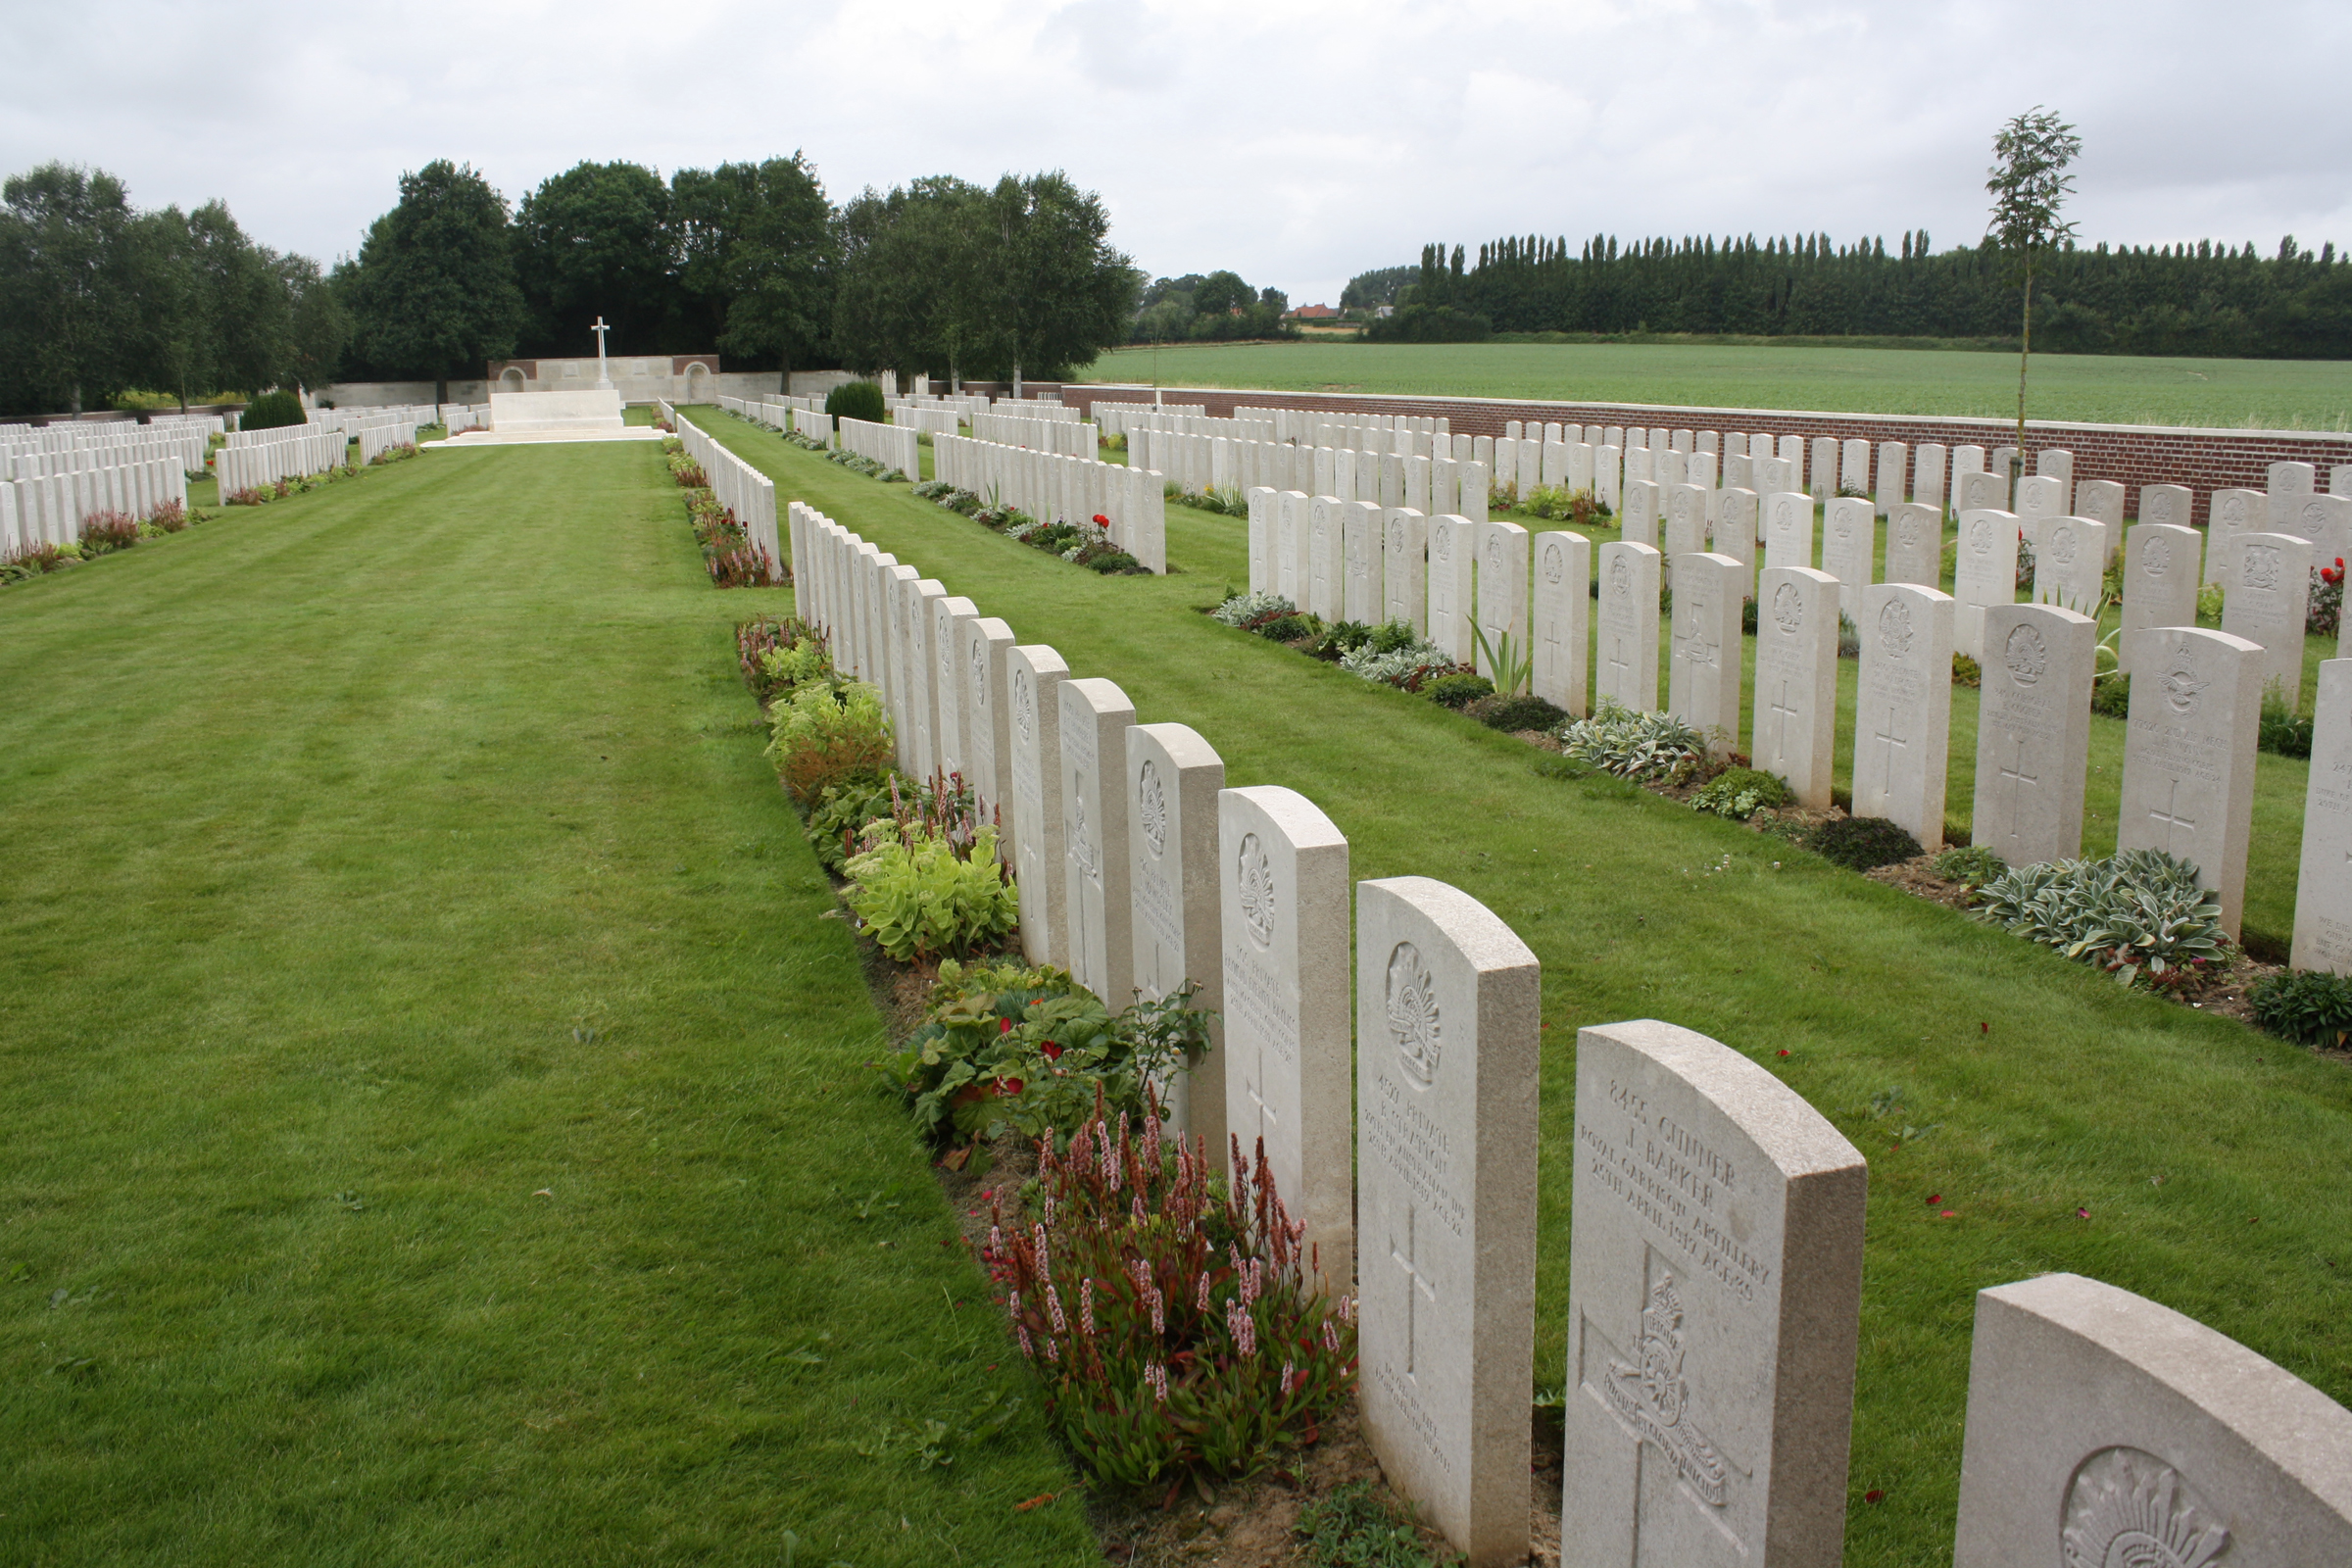 GREVILLERS BRITISH CEMETERY